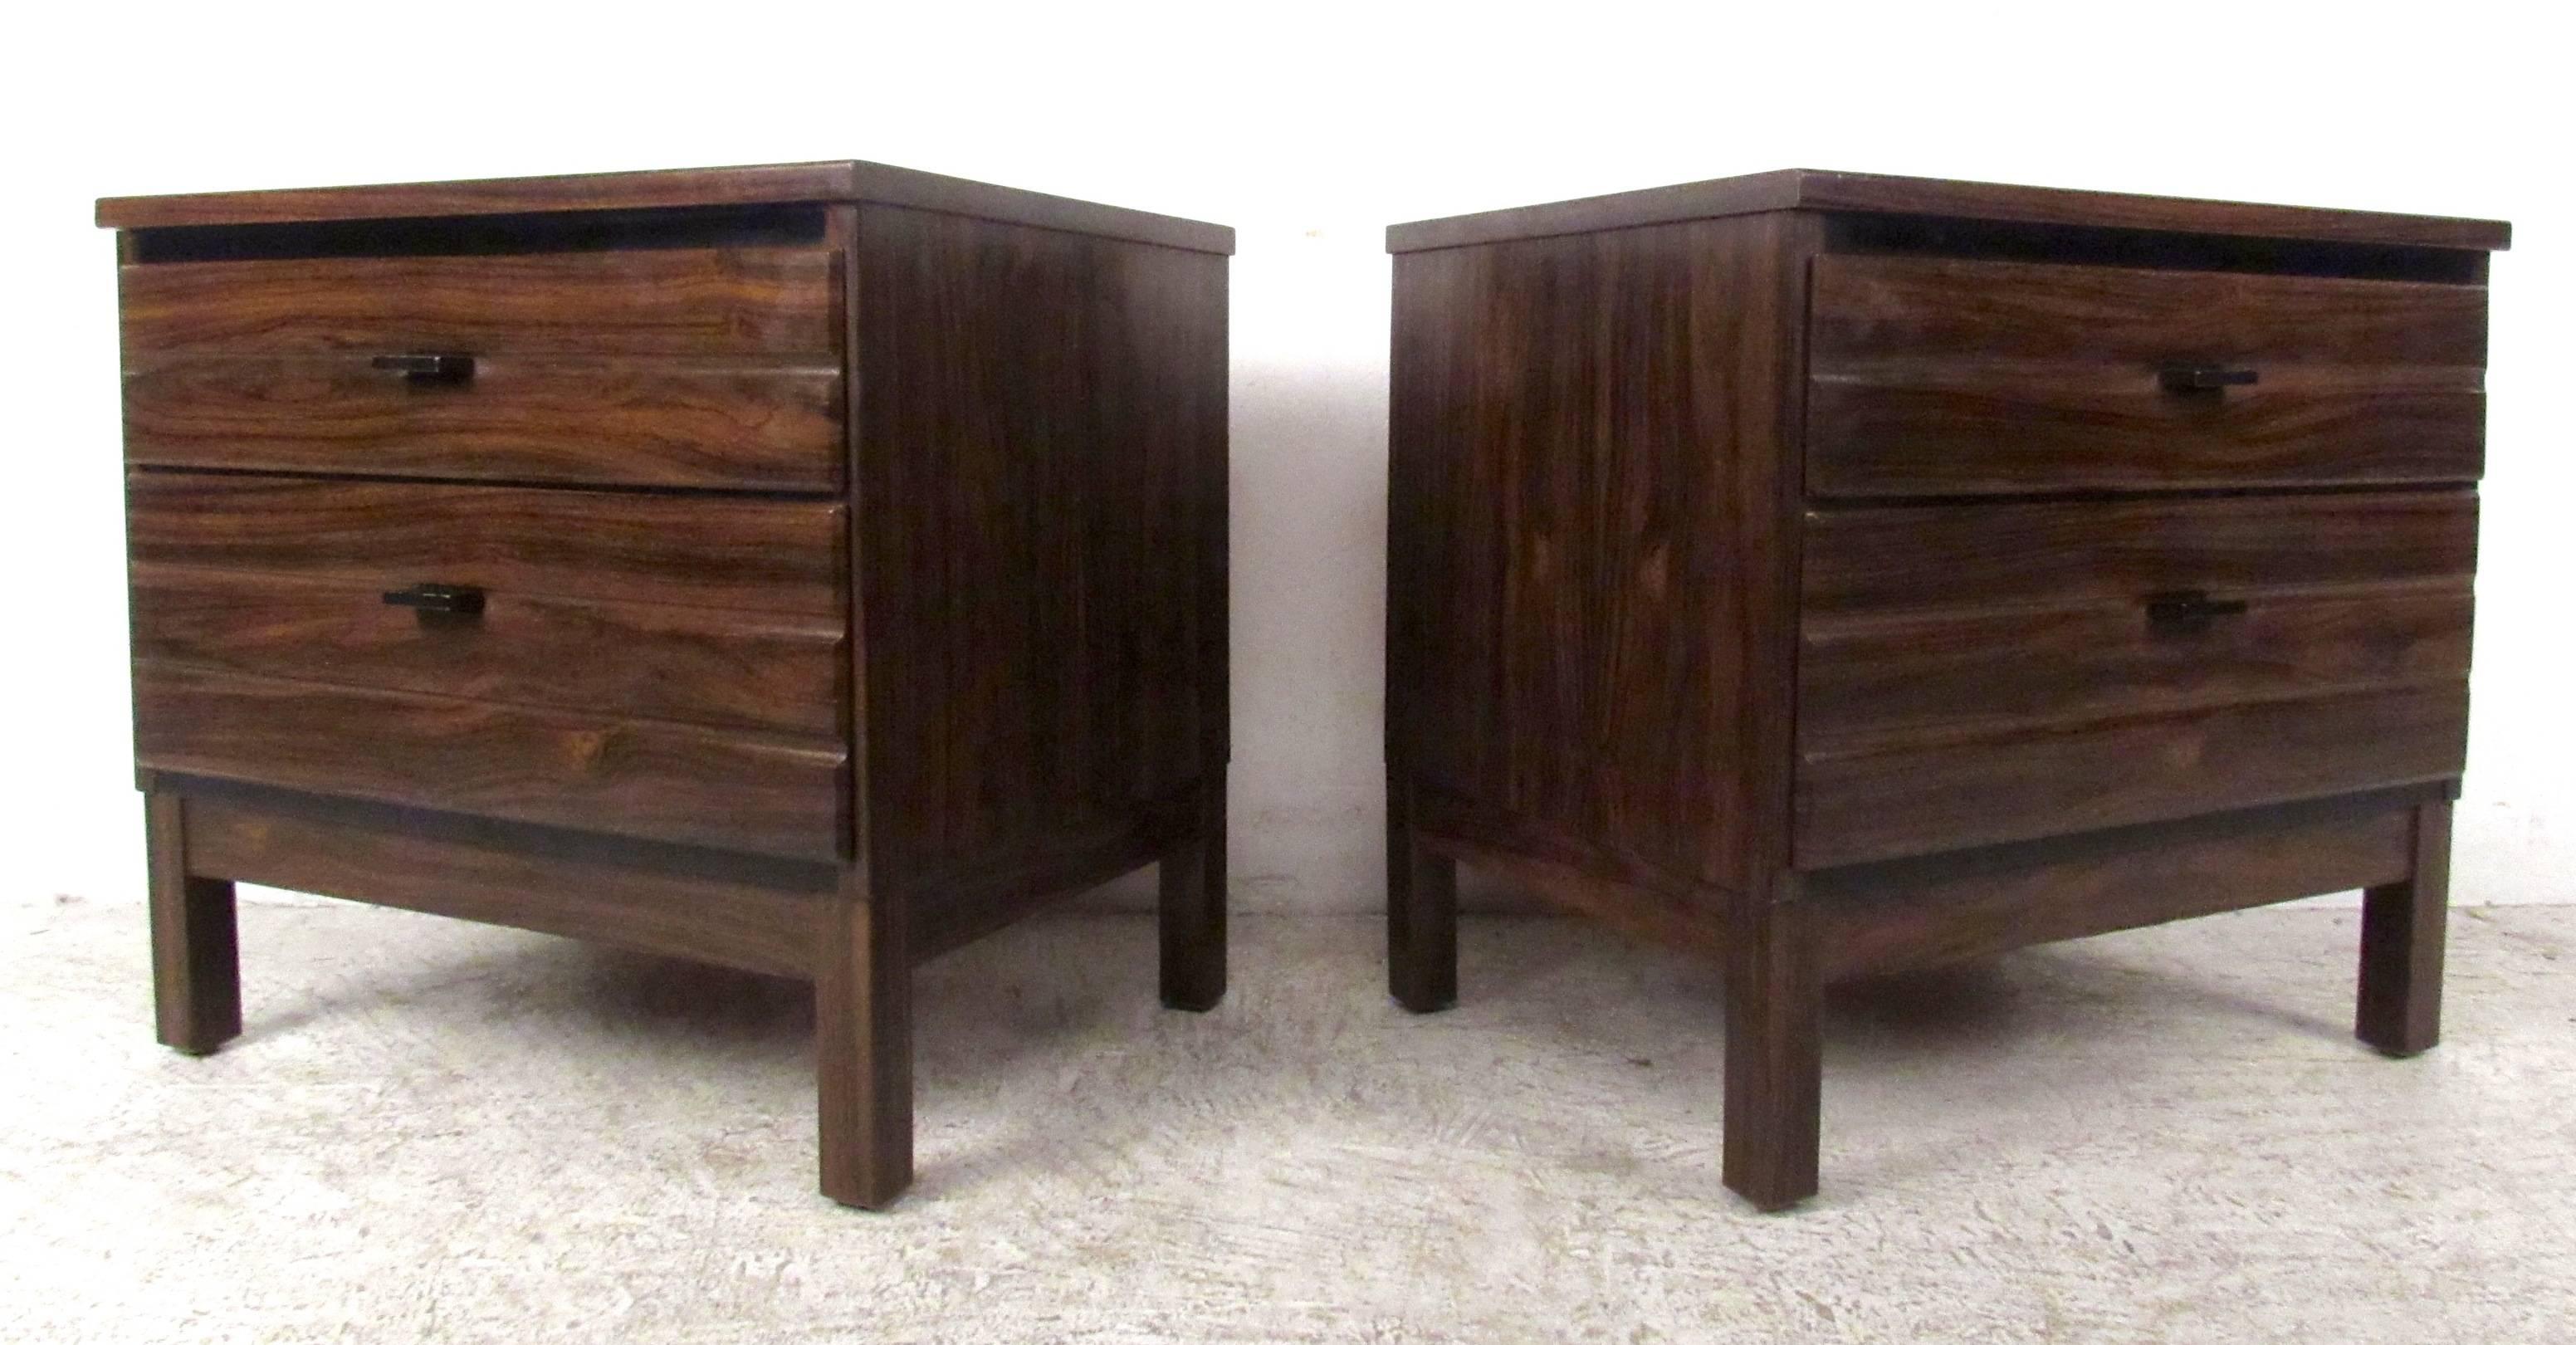 Two vintage-modern nightstands featuring two drawers each and beautiful rosewood grain, manufactured by American of Martinsville. Ideal pair of bedside end tables perfect for bedroom storage. 

Please confirm item location NY or NJ with dealer.